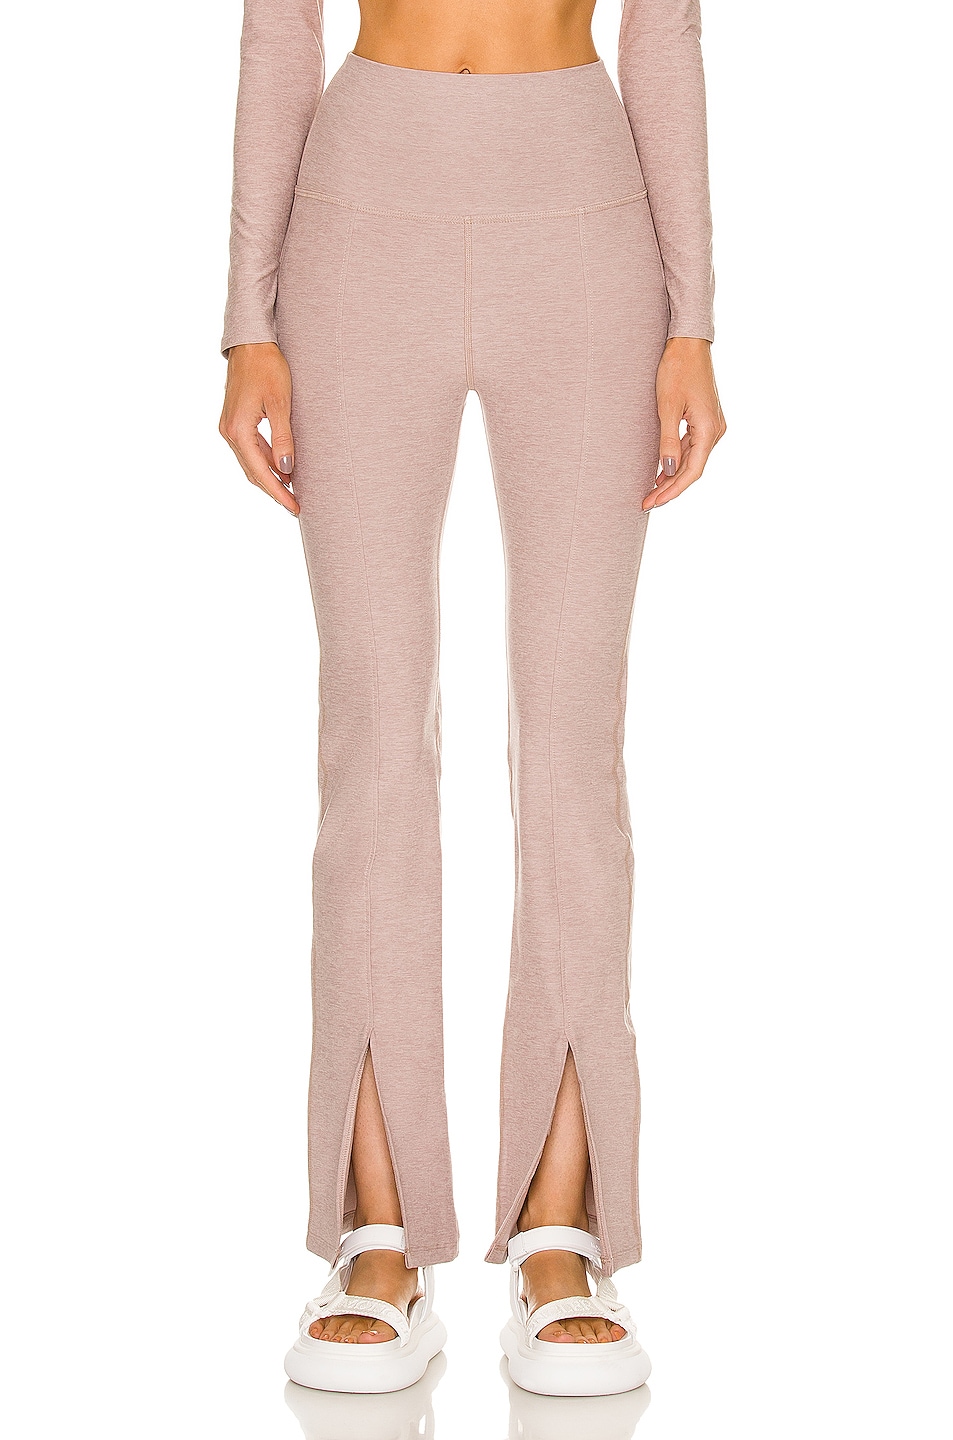 Image 1 of Beyond Yoga Spacedye High Waisted Make The Cut Pant in Chai